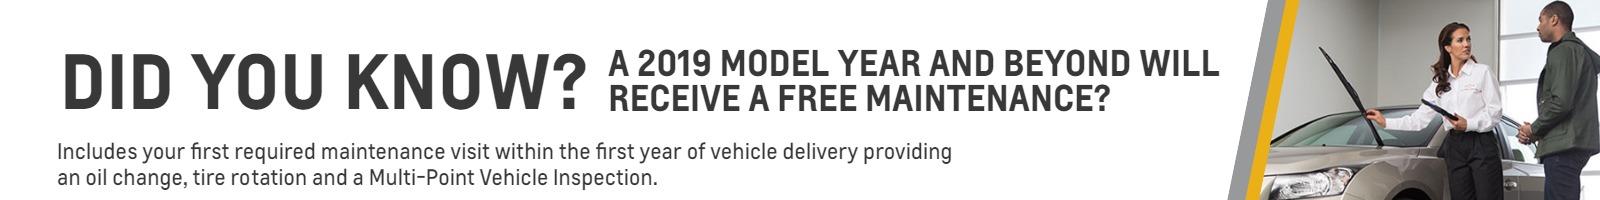 Did you know? A 2019 model year and beyond will receive a free maintenance?